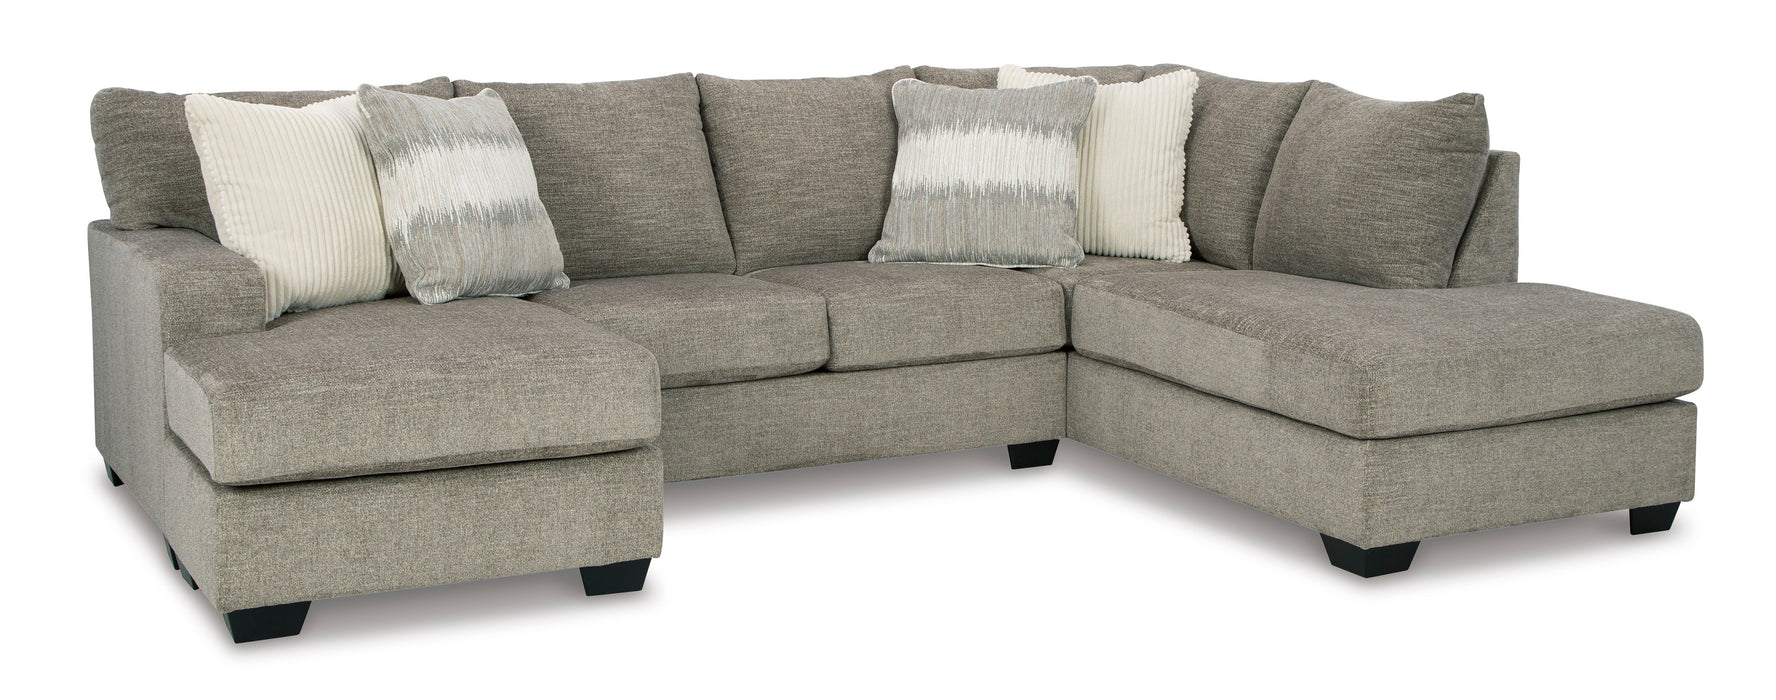 Creswell Linen Sectional RAF with Chaise Sectional